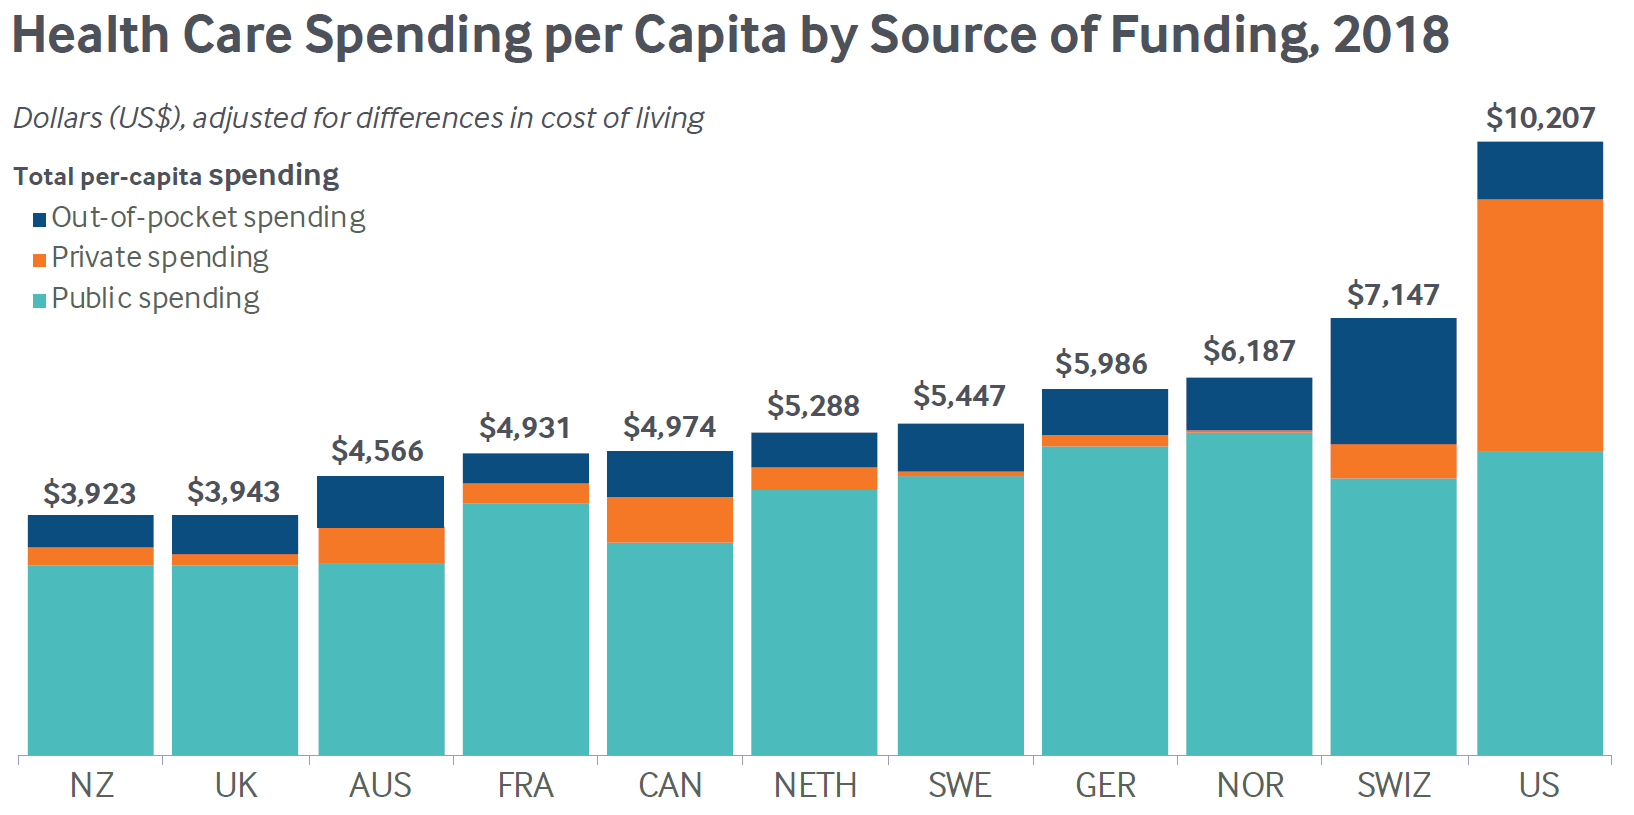 Health Care Spending per Capita by Source of Funding, 2018